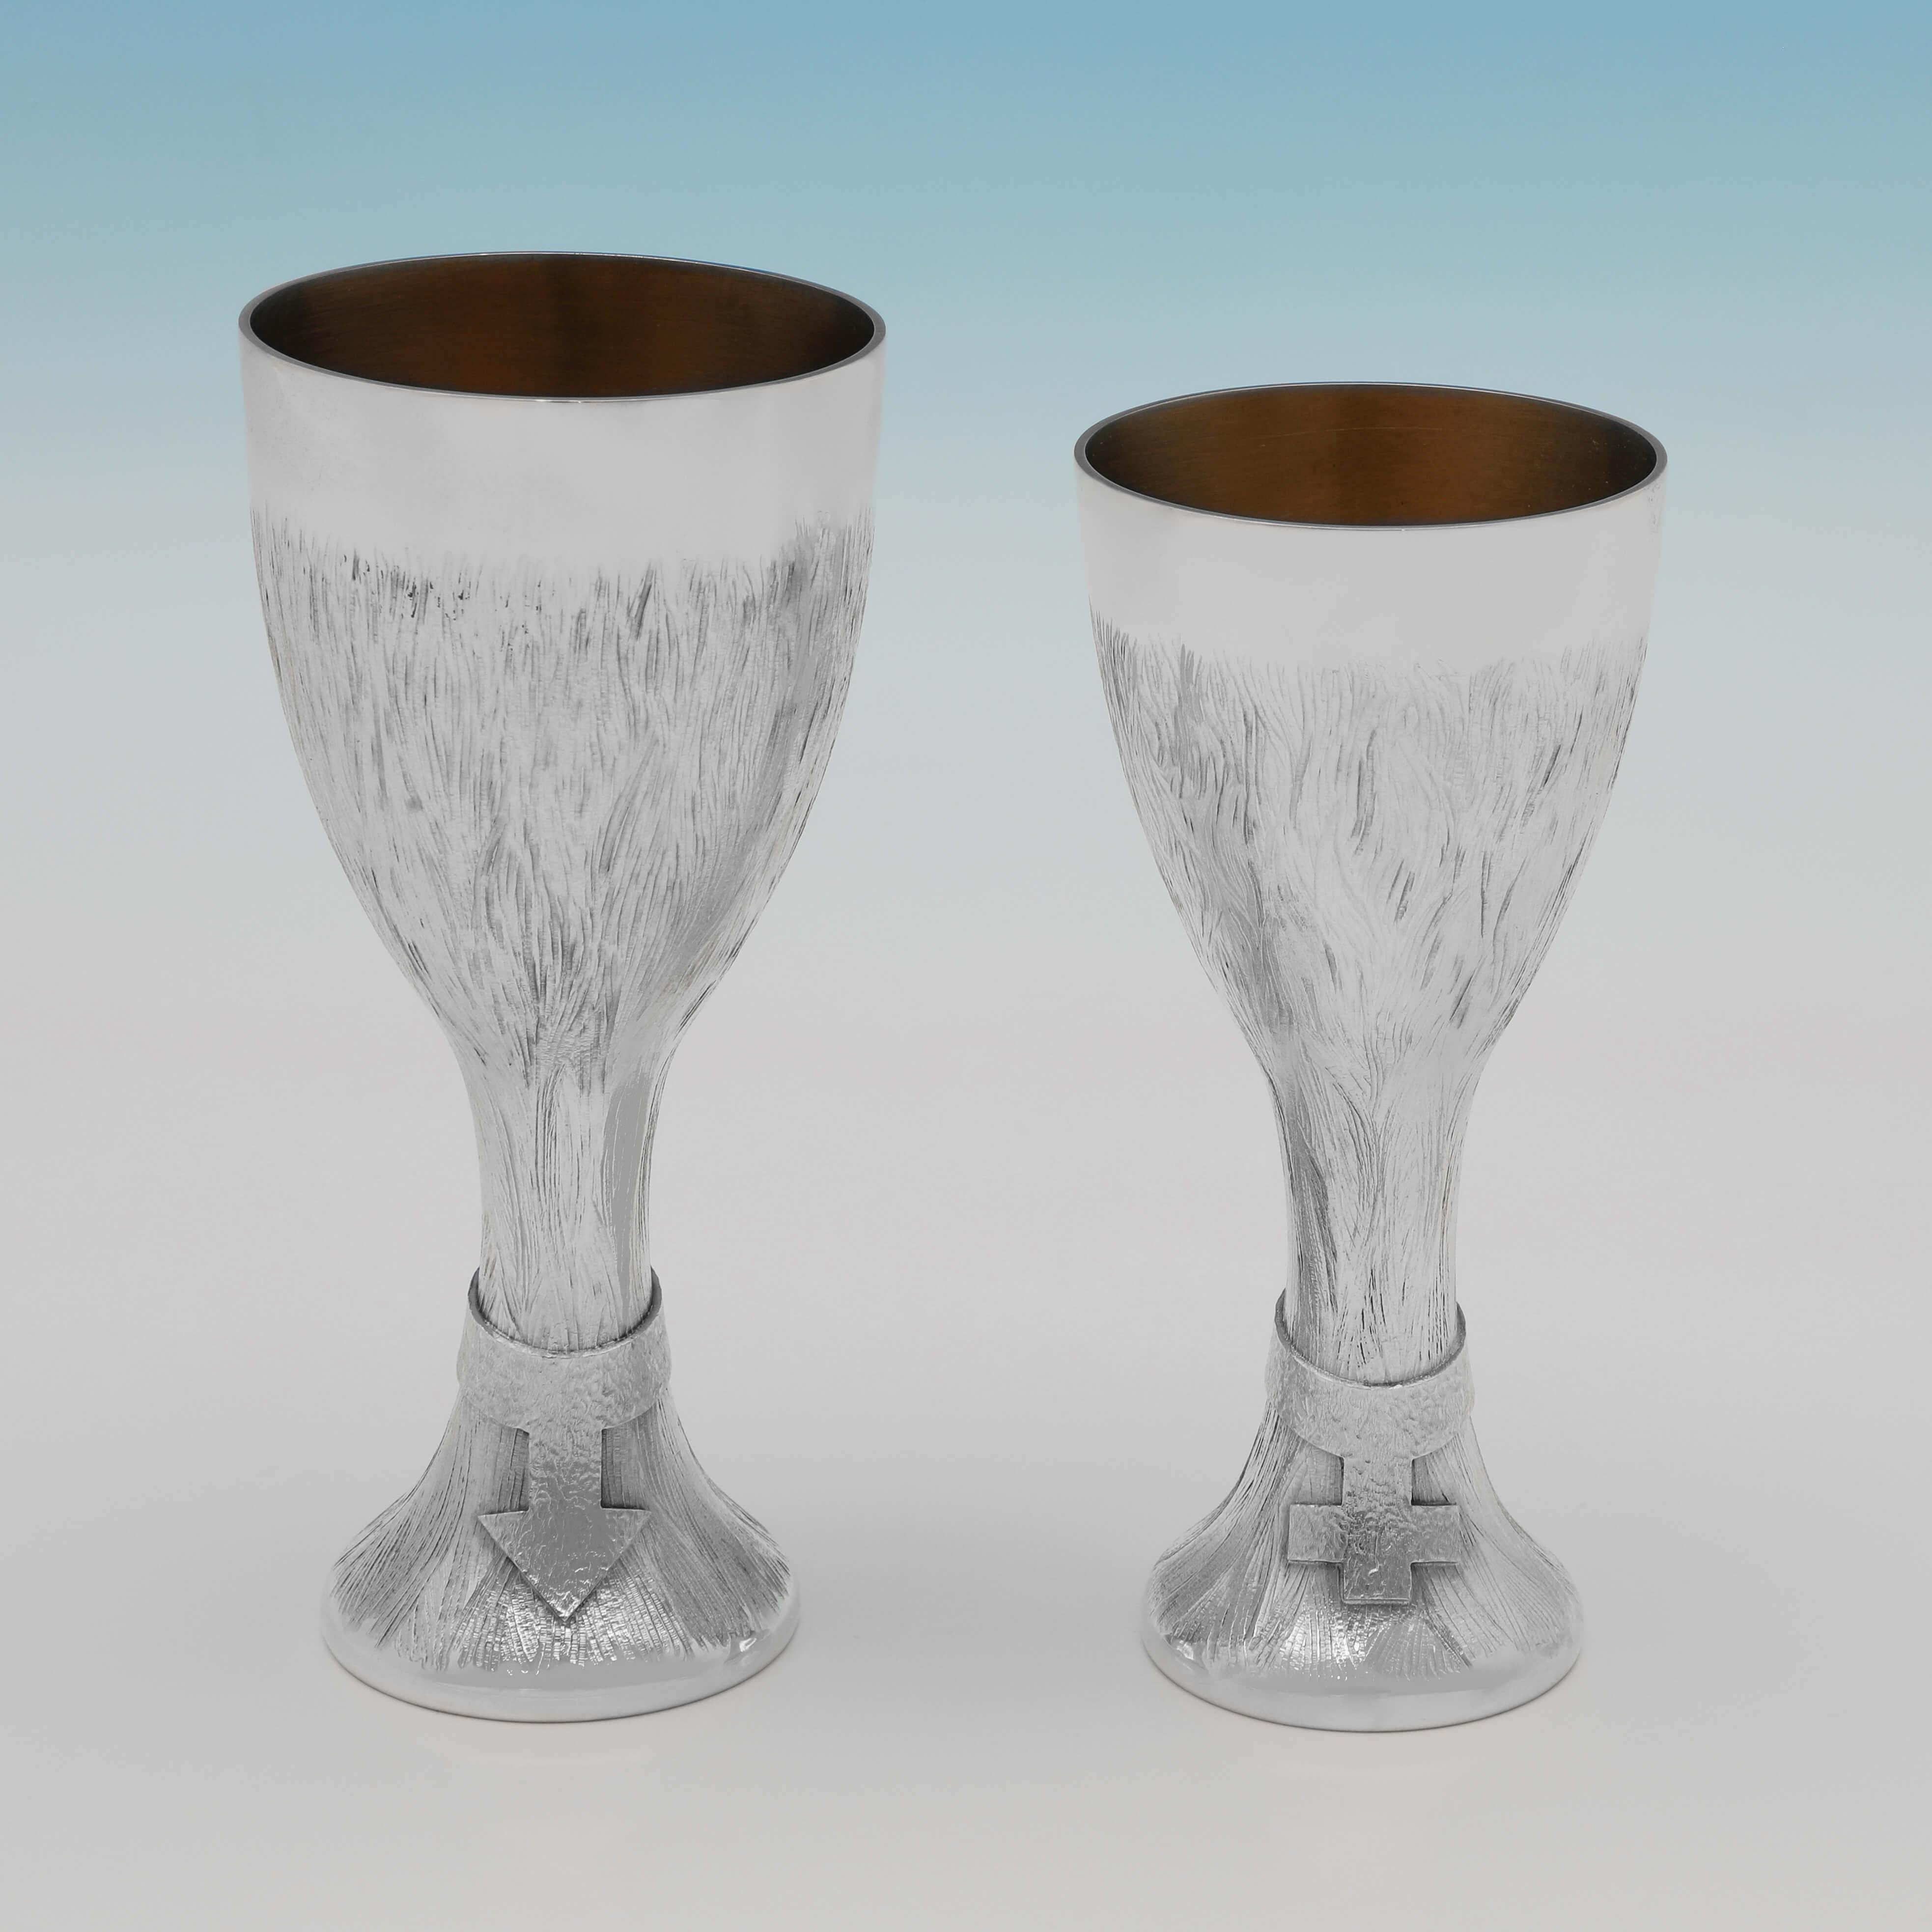 Hallmarked in London in 1974 by Christopher Lawrence, this handsome pair of Sterling Silver Goblets are presented in their original box, and are in Lawrences signature style. The larger goblet measures 5.75